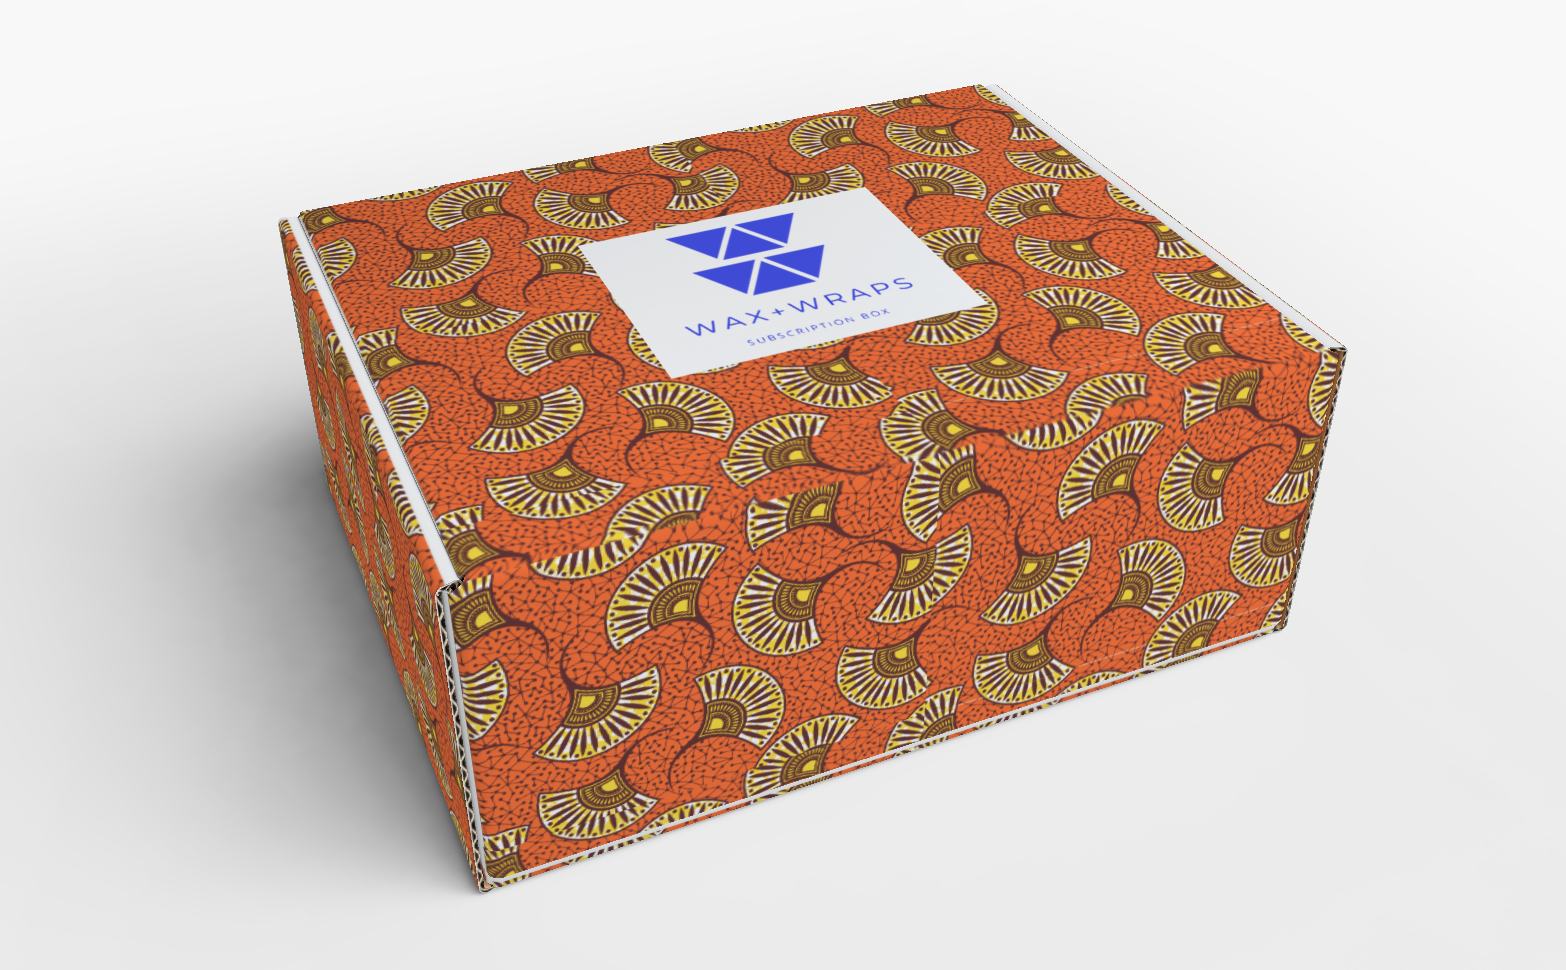 368-r257-wax-and-wraps-box.png